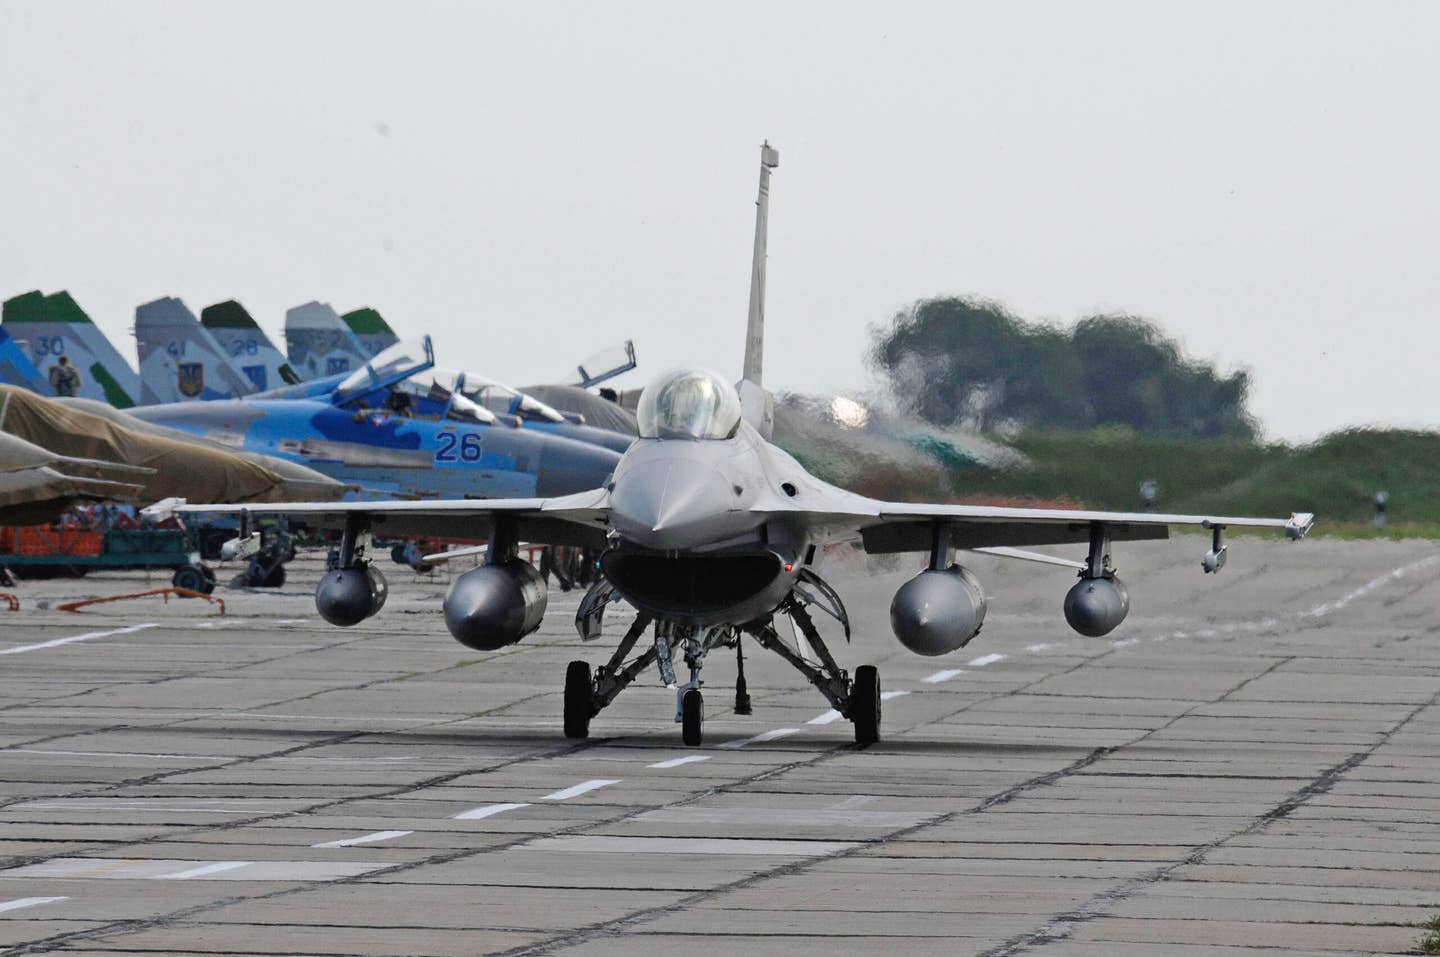 A U.S. Air Force F-16C taxis in front of Ukrainian Su-27 and MiG-29 fighter jets, on the ramp at Mirgorod Air Base, Ukraine. The Viper was in Ukraine for Exercise Safe Skies 2011. <em>U.S. Air Force</em>